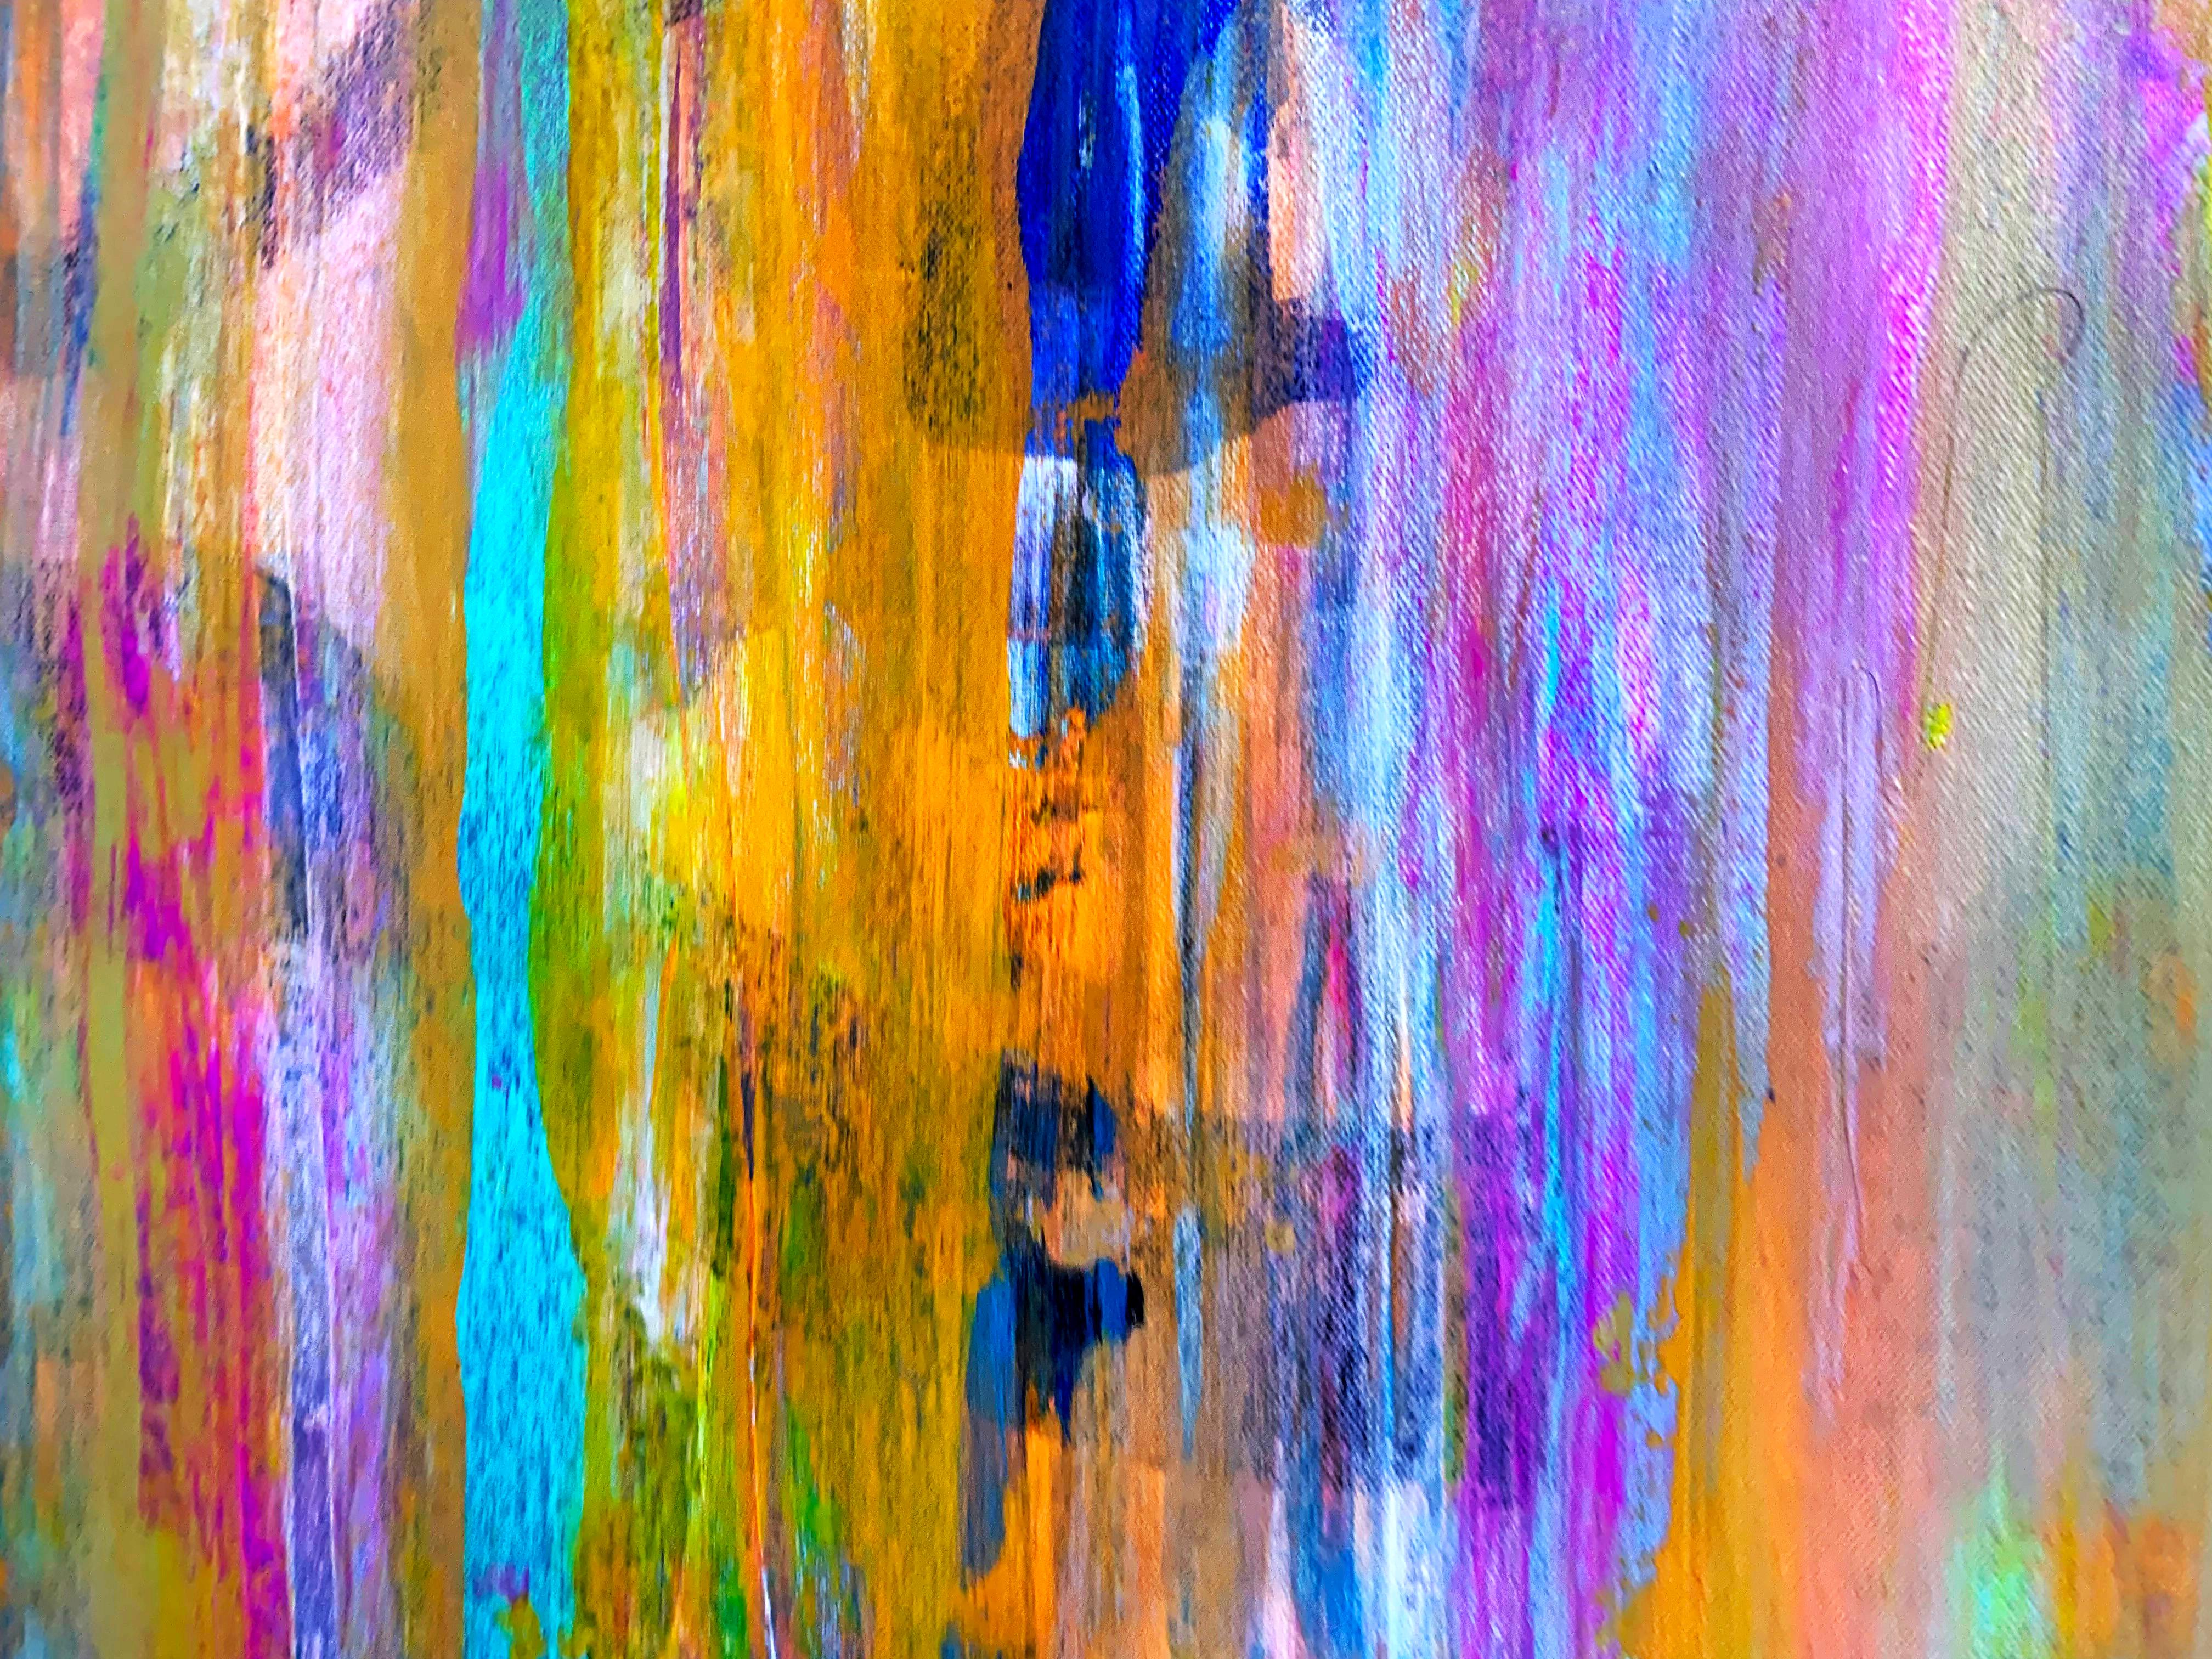 This artwork is a series of colours falling together, unevenly and disrupting each one, as in a waterfall of coloured elements. The work is in the style of abstract expressionism.

This artwork is painted on professional-grade canvas stretched and